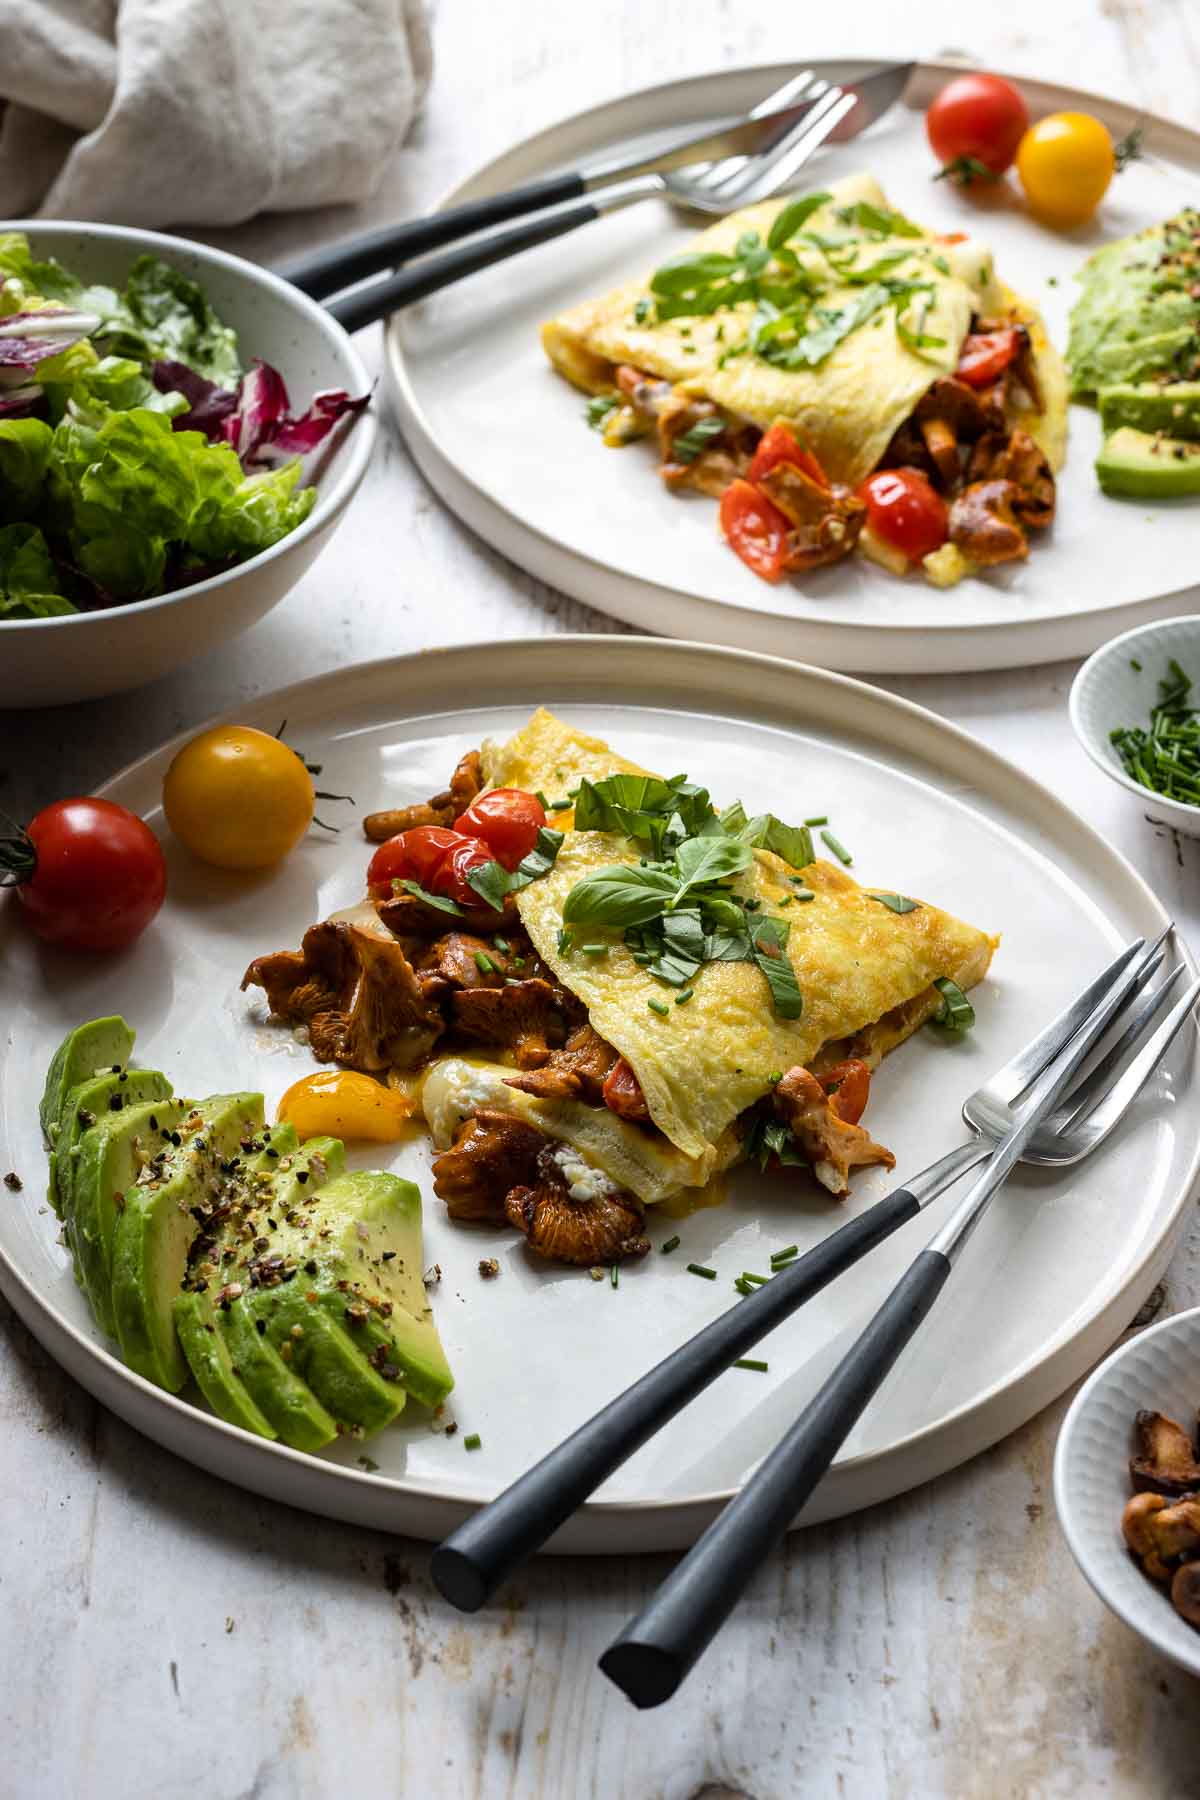 Mushroom Omelette with Tomato & Goat's Cheese